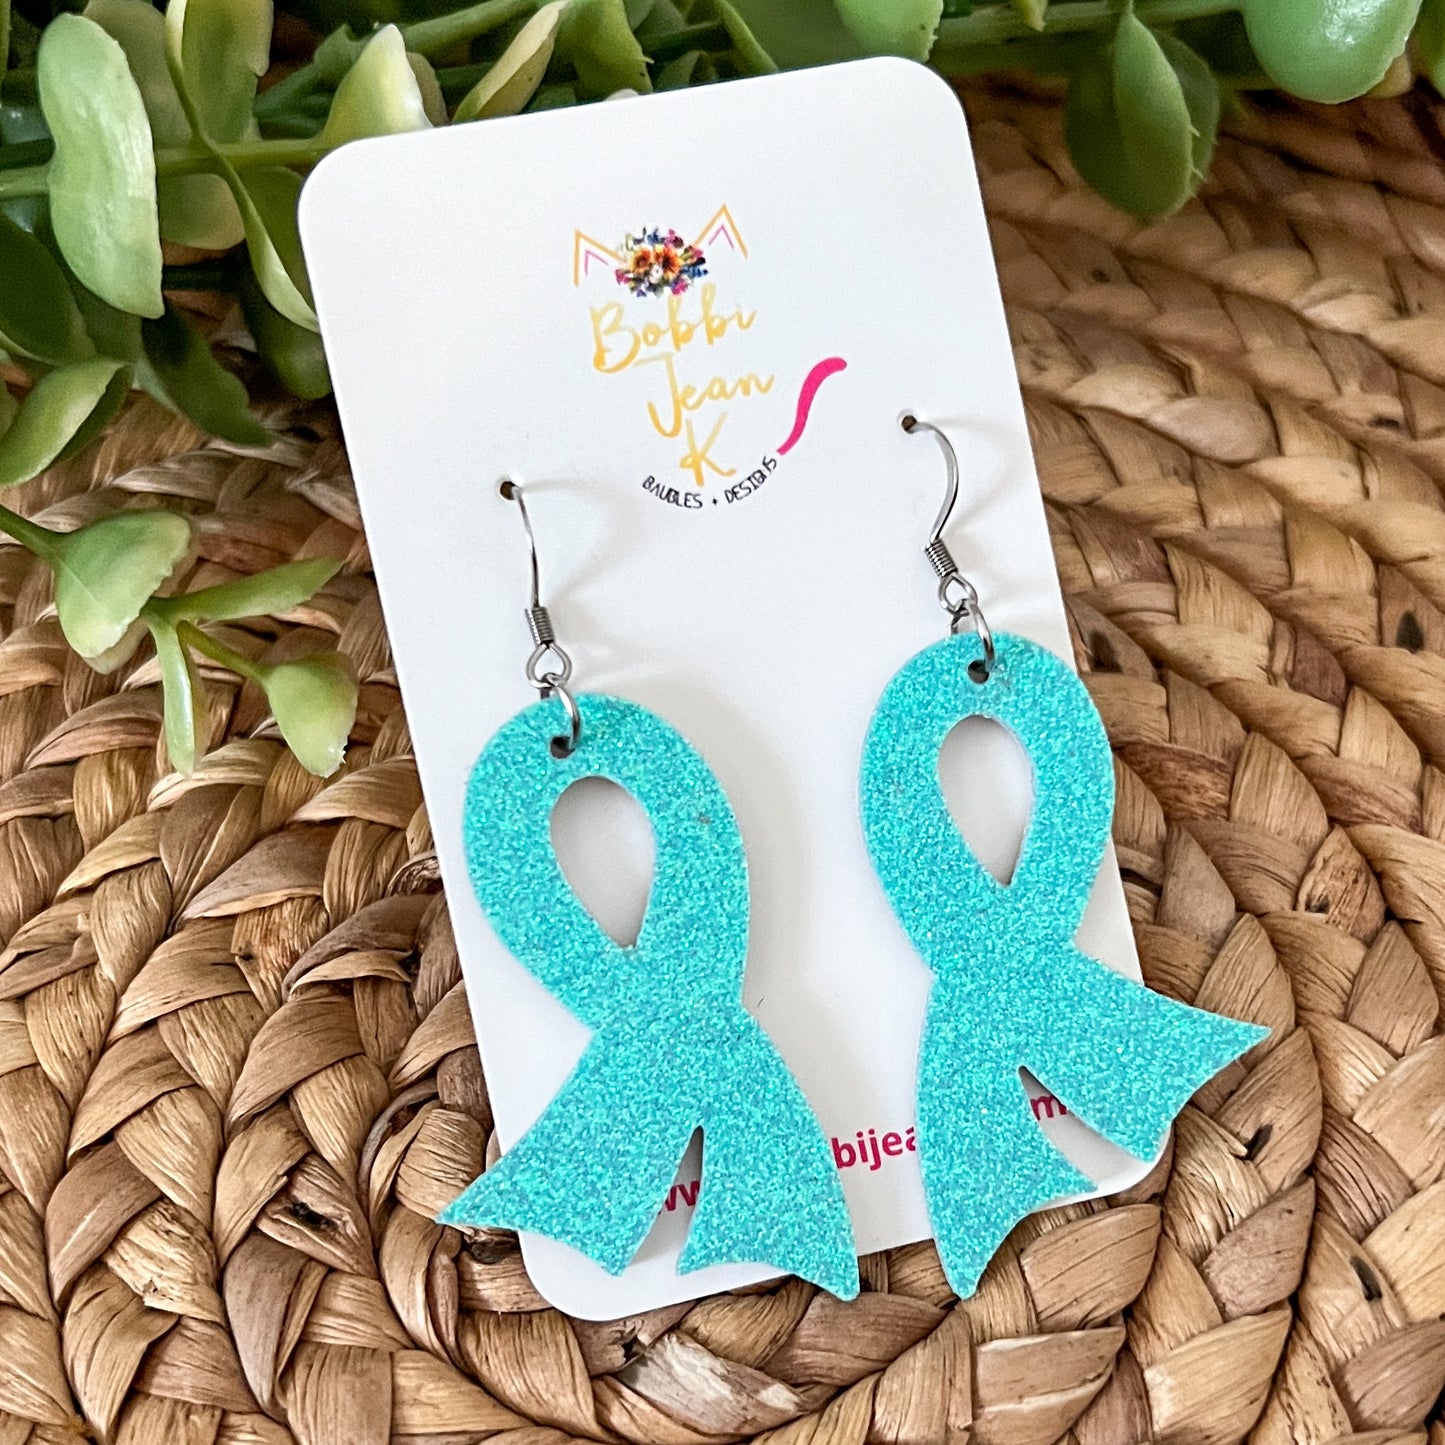 Teal/Turquoise Infused Glitter "Flared" Awareness Ribbon Earrings: Ovarian Cancer, Dysautonomia